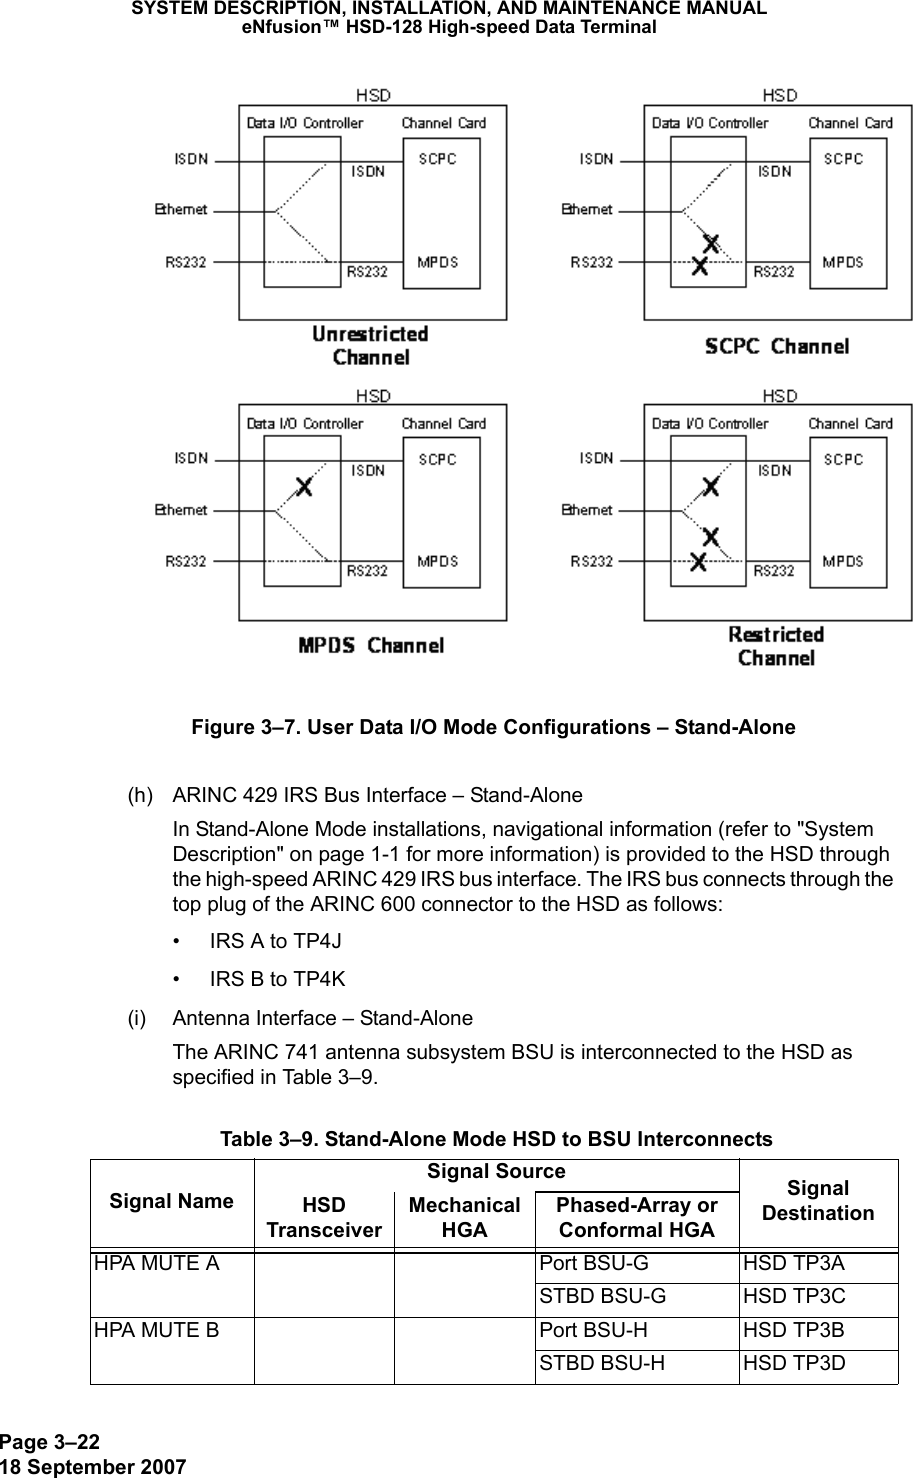 Page 3–2218 September 2007SYSTEM DESCRIPTION, INSTALLATION, AND MAINTENANCE MANUALeNfusion™ HSD-128 High-speed Data TerminalFigure 3–7. User Data I/O Mode Configurations – Stand-Alone(h) ARINC 429 IRS Bus Interface – Stand-AloneIn Stand-Alone Mode installations, navigational information (refer to &quot;System Description&quot; on page 1-1 for more information) is provided to the HSD through the high-speed ARINC 429 IRS bus interface. The IRS bus connects through the top plug of the ARINC 600 connector to the HSD as follows:• IRS A to TP4J• IRS B to TP4K(i) Antenna Interface – Stand-AloneThe ARINC 741 antenna subsystem BSU is interconnected to the HSD as specified in Table 3–9. Table 3–9. Stand-Alone Mode HSD to BSU InterconnectsSignal NameSignal Source Signal DestinationHSD TransceiverMechanical HGAPhased-Array or Conformal HGAHPA MUTE A  Port BSU-G  HSD TP3A STBD BSU-G HSD TP3CHPA MUTE B Port BSU-H HSD TP3B STBD BSU-H HSD TP3D